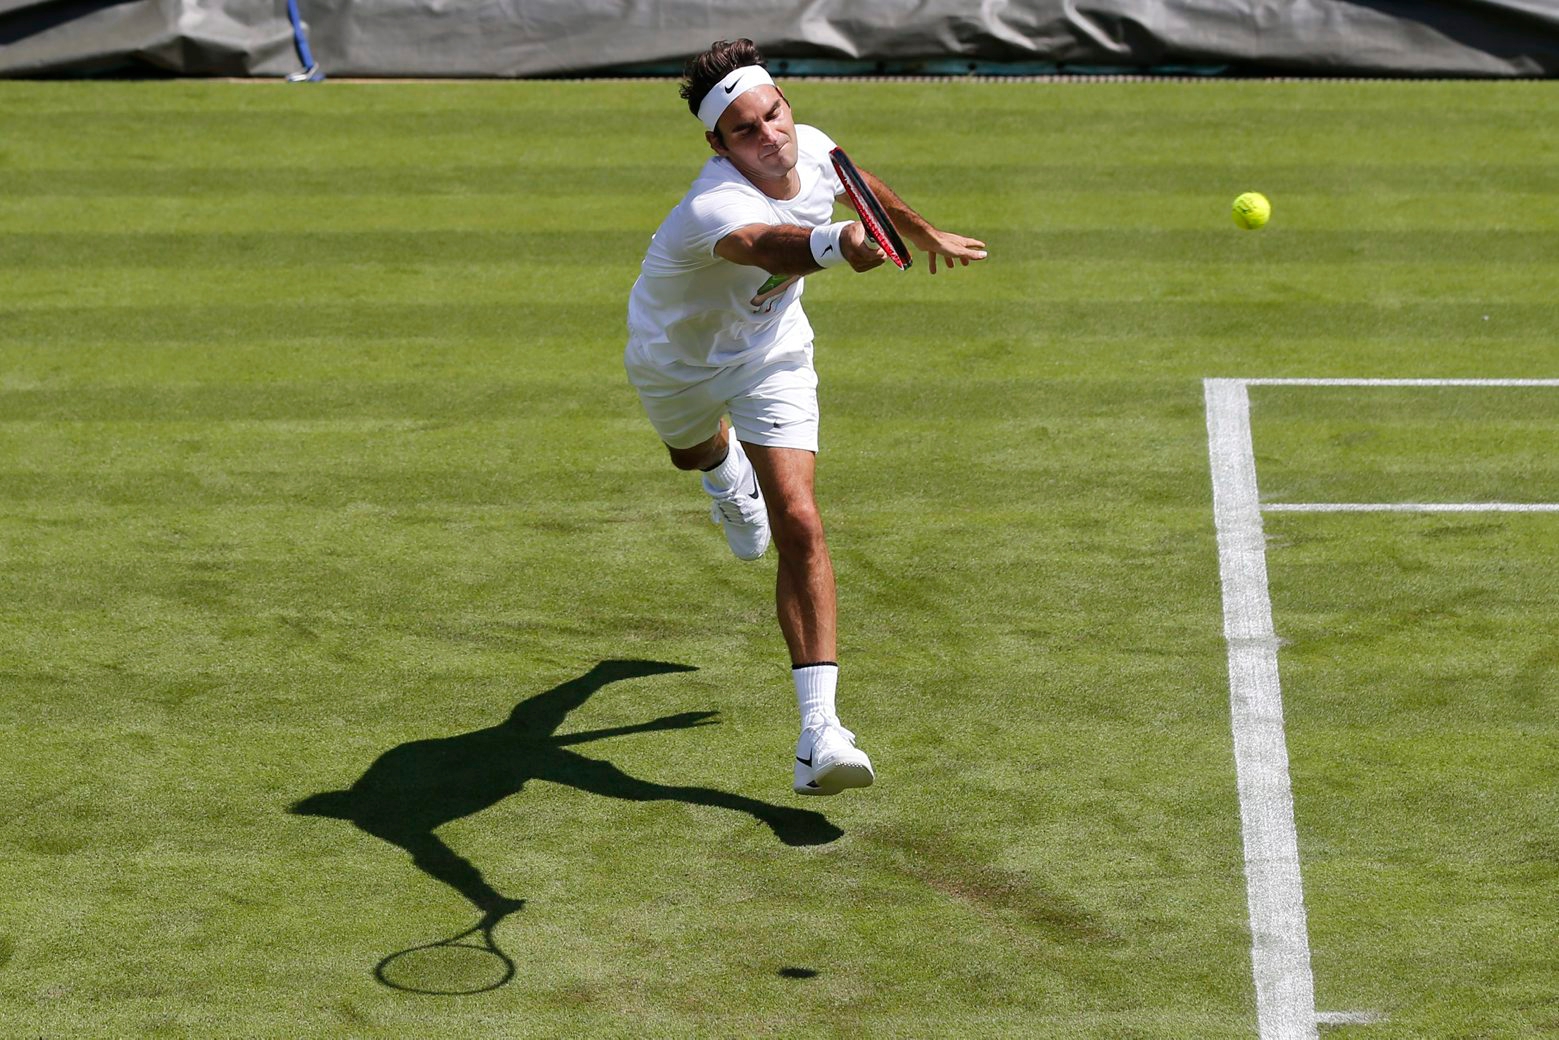 Roger Federer of Switzerland returns a ball  during a training session at the All England Lawn Tennis Championships in Wimbledon, London, Friday, June 24, 2016. The Wimbledon Tennis Championships 2016 will be held in London from 27 June to 10 July. (KEYSTONE/Peter Klaunzer) BRITAIN TENNIS WIMBLEDON 2016